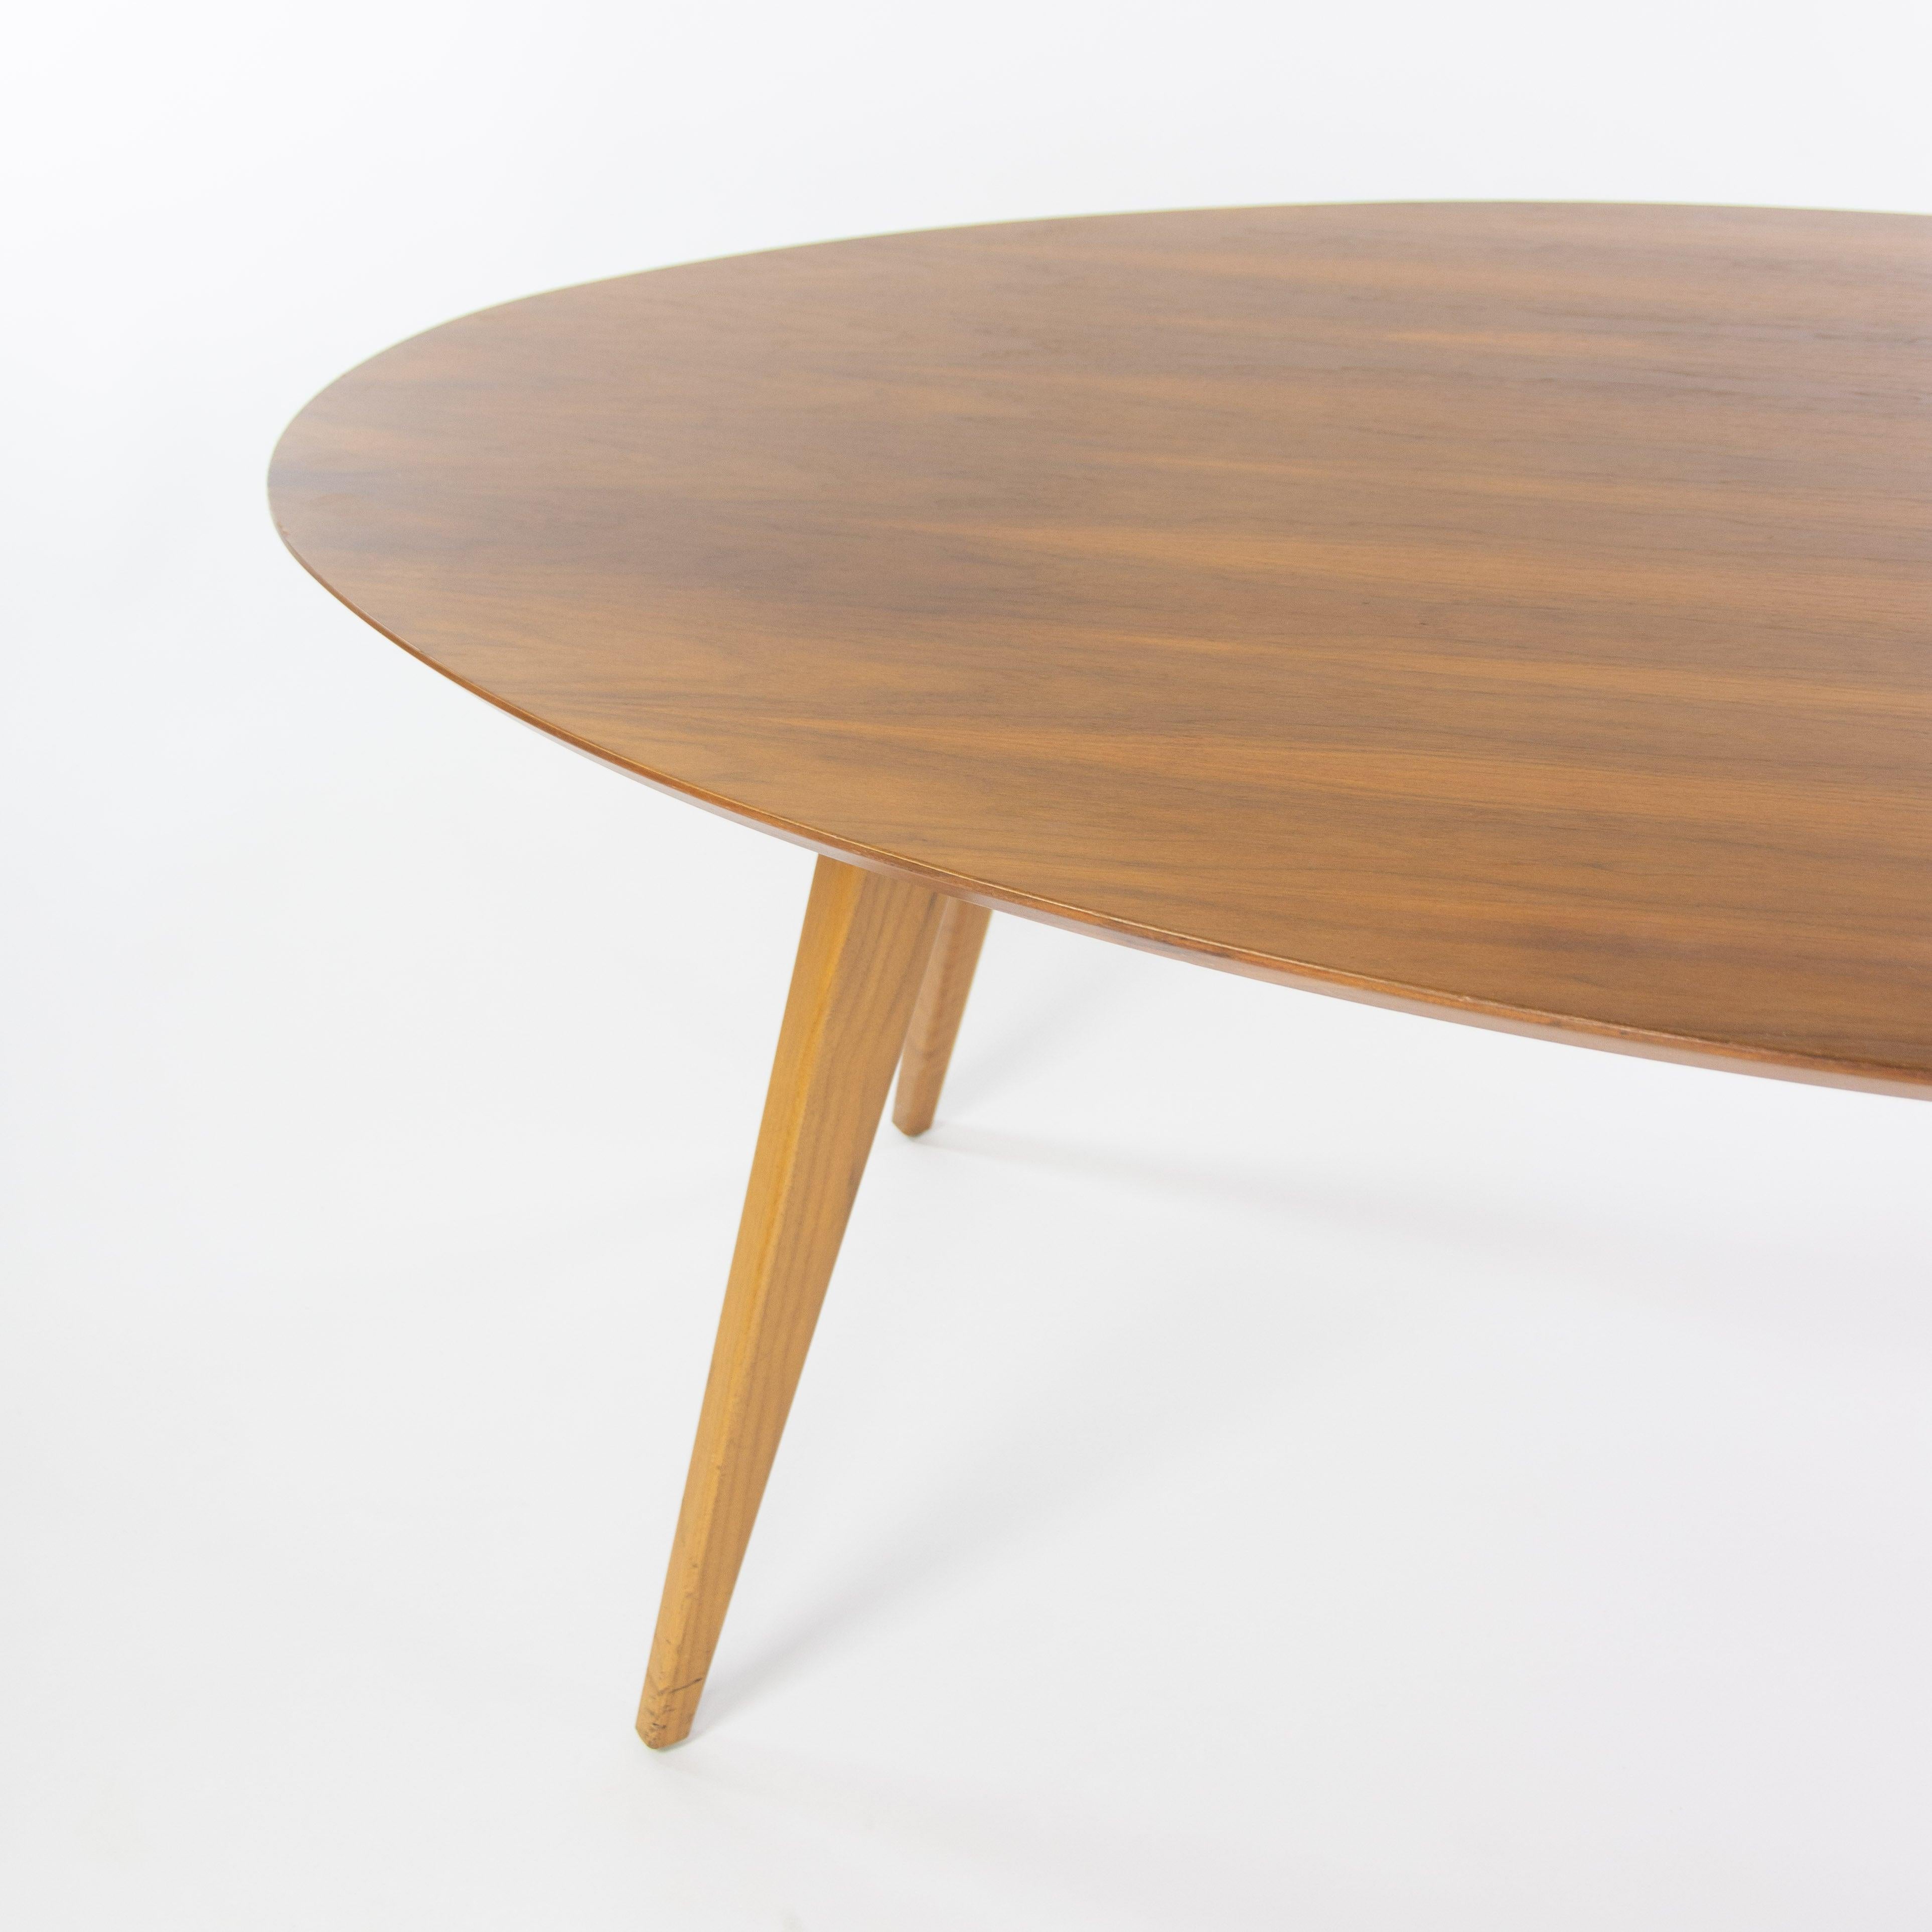 Custom Jens Risom for Knoll 78x48 inch Oval Walnut Dining / Conference Table For Sale 2